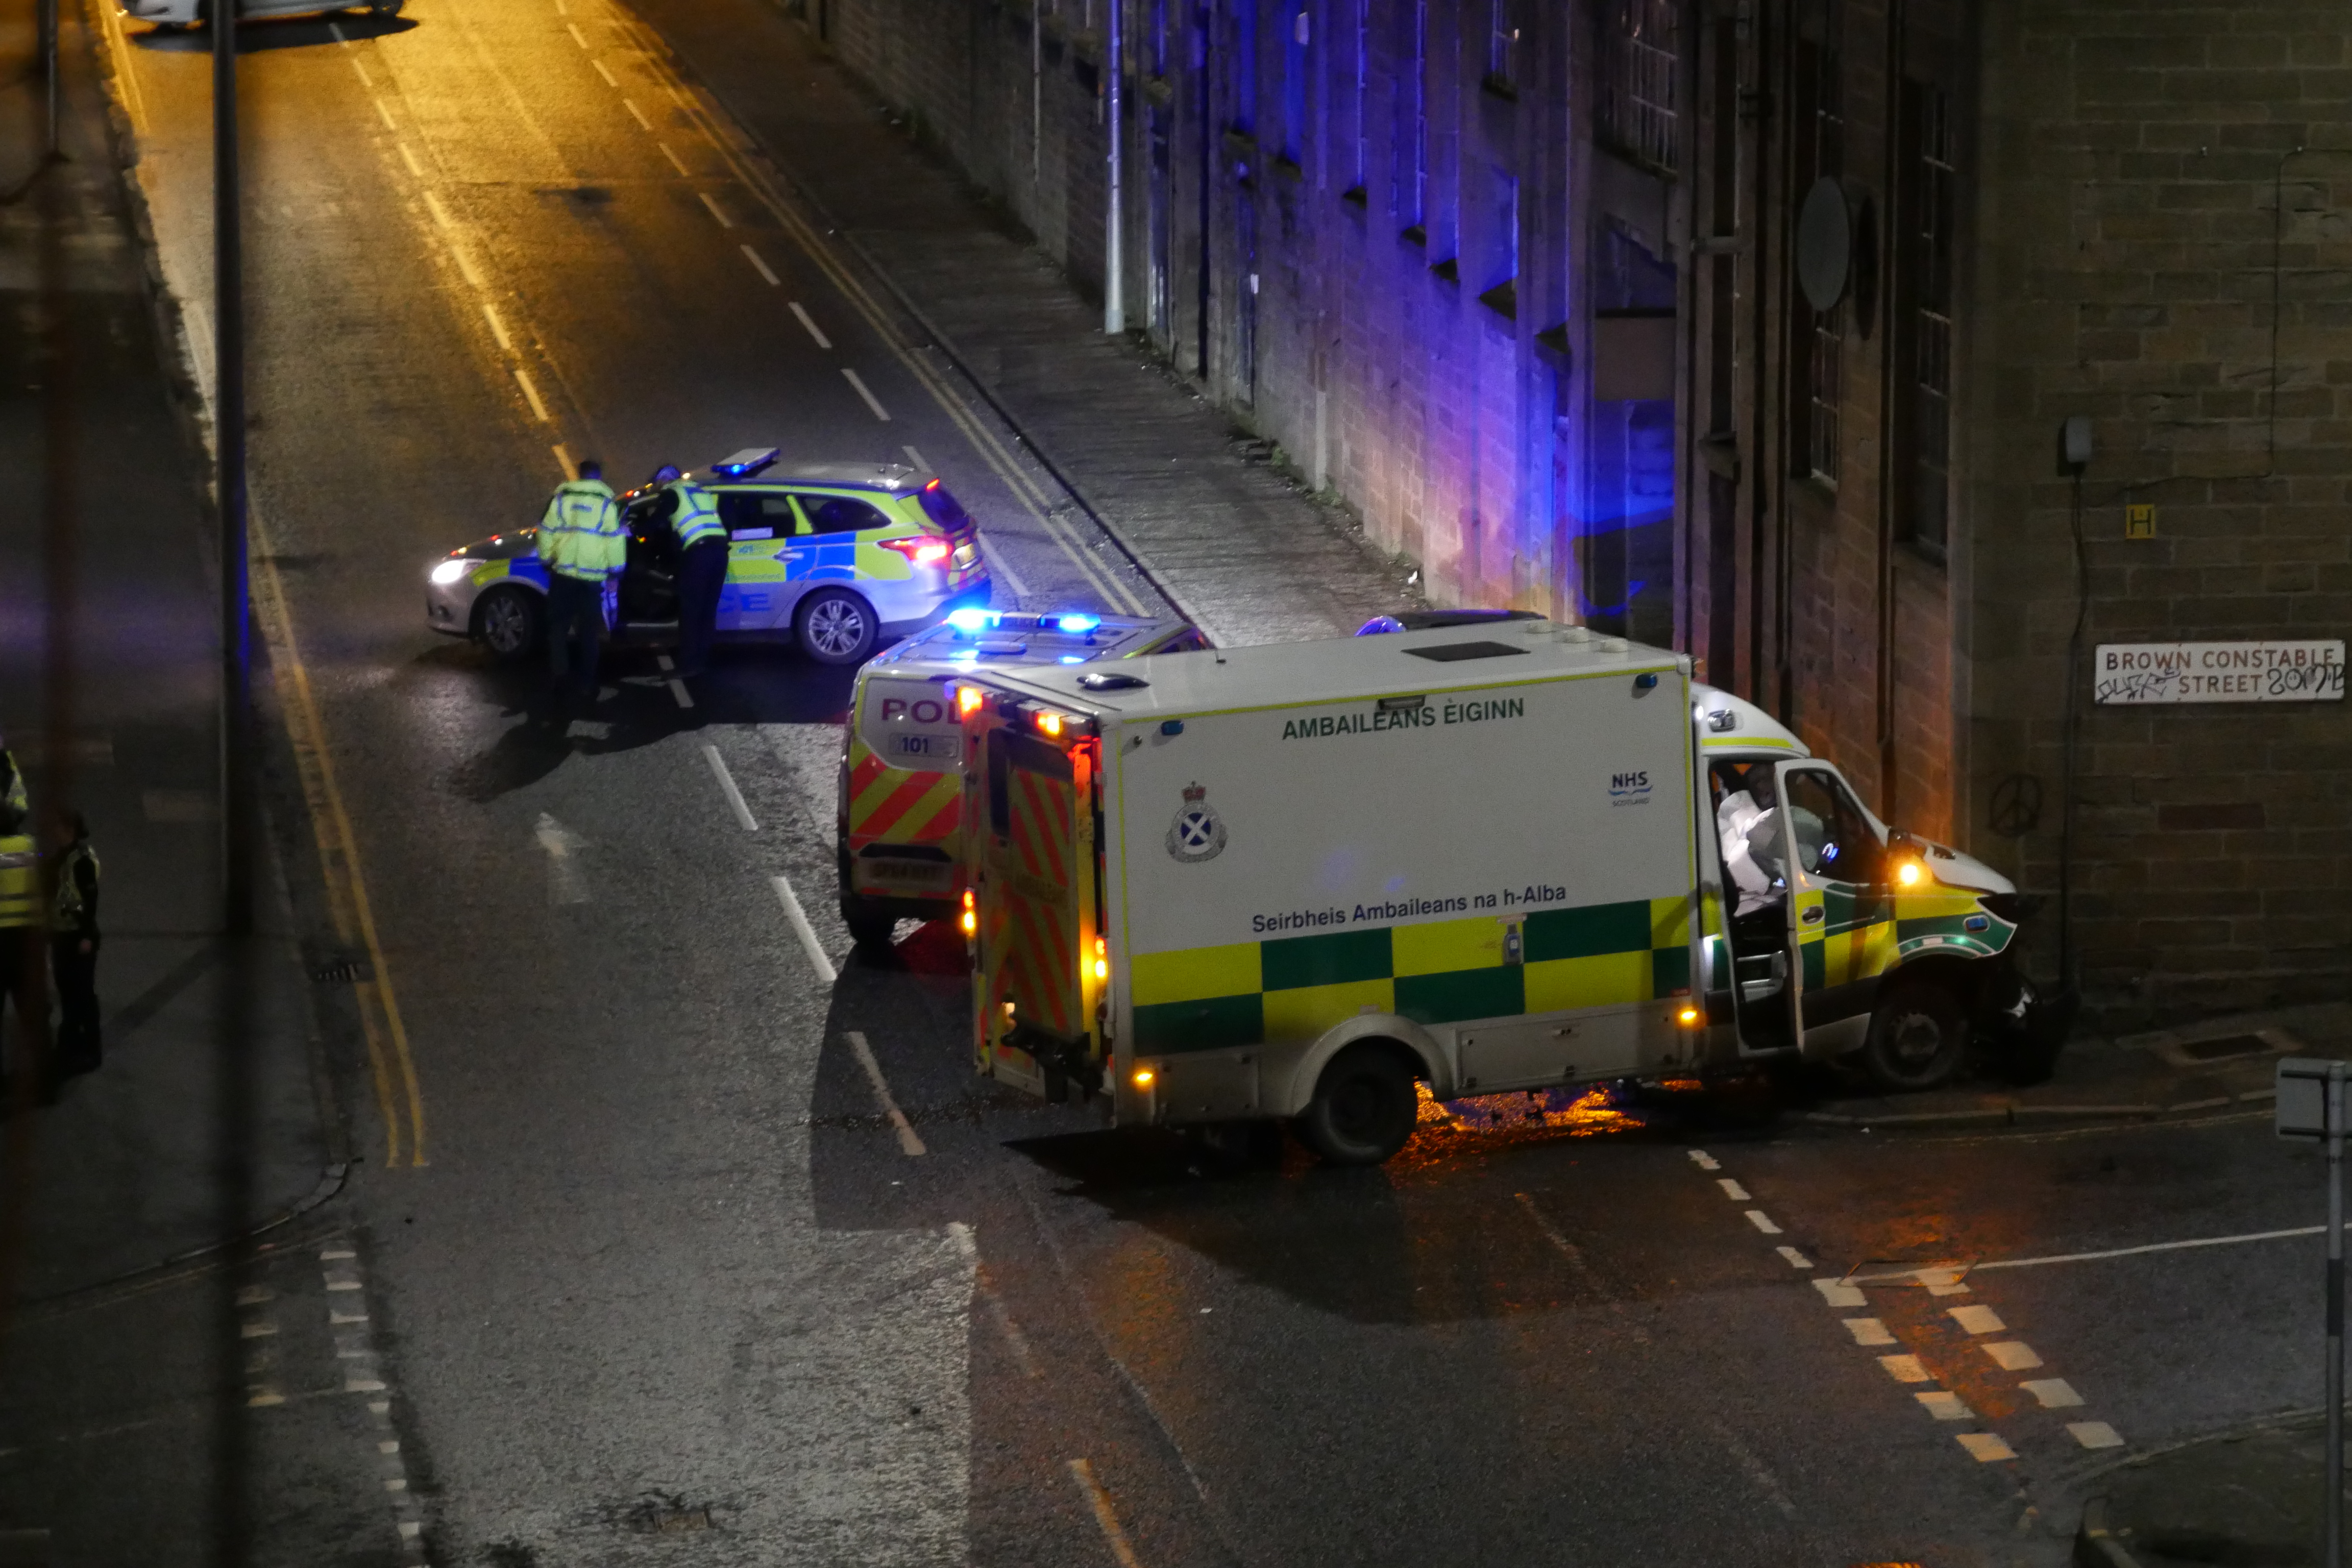 The ambulance at the junction of Brown Constable Street. Picture by Matthew Robb.